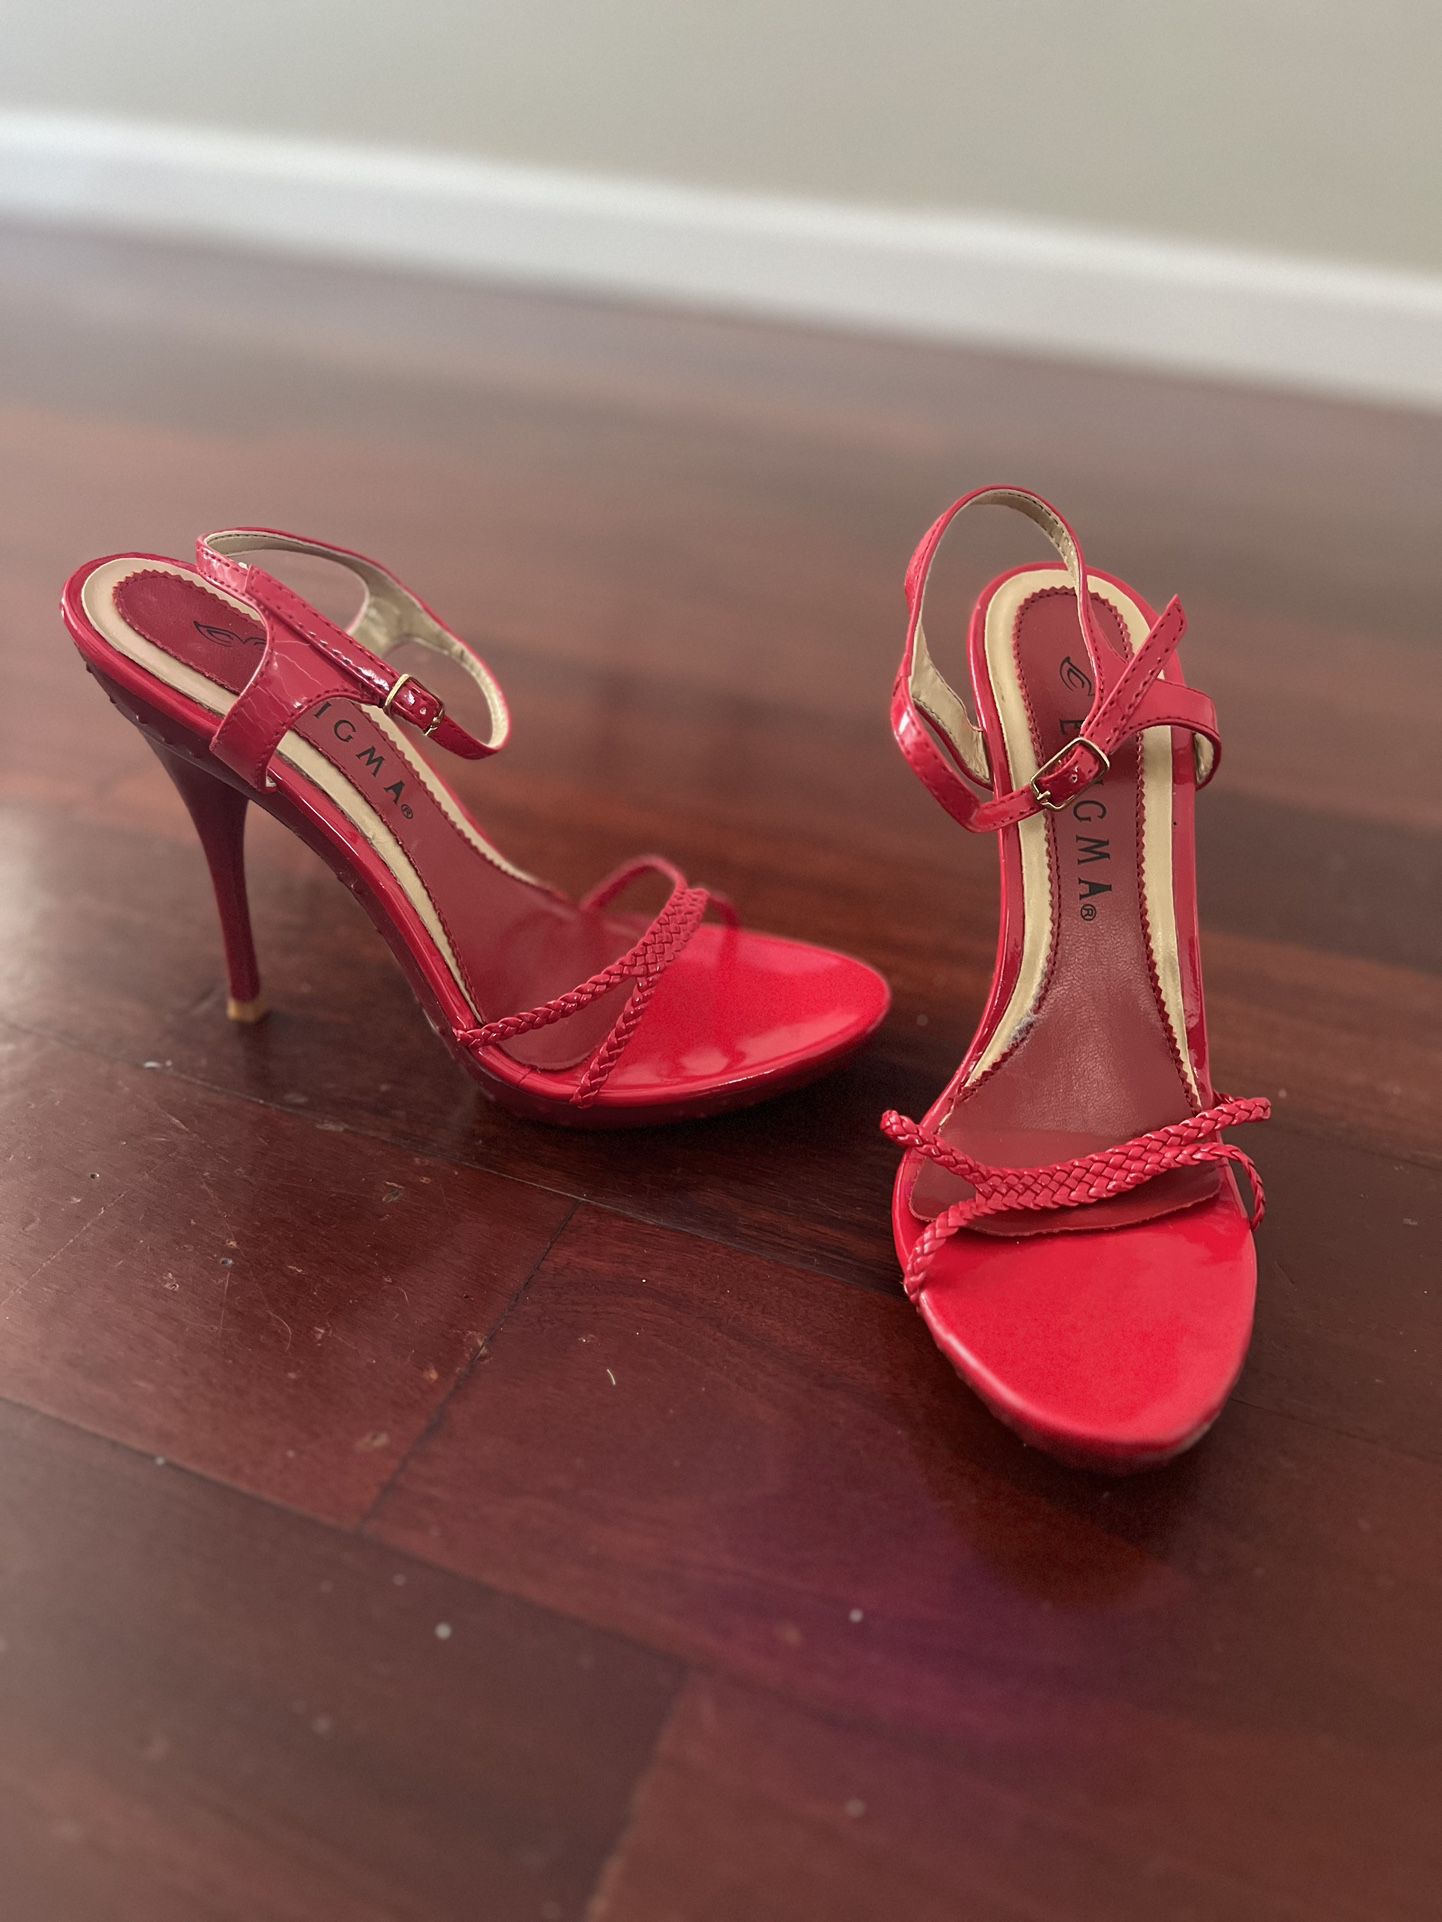 Enigma Red Heels Size 7